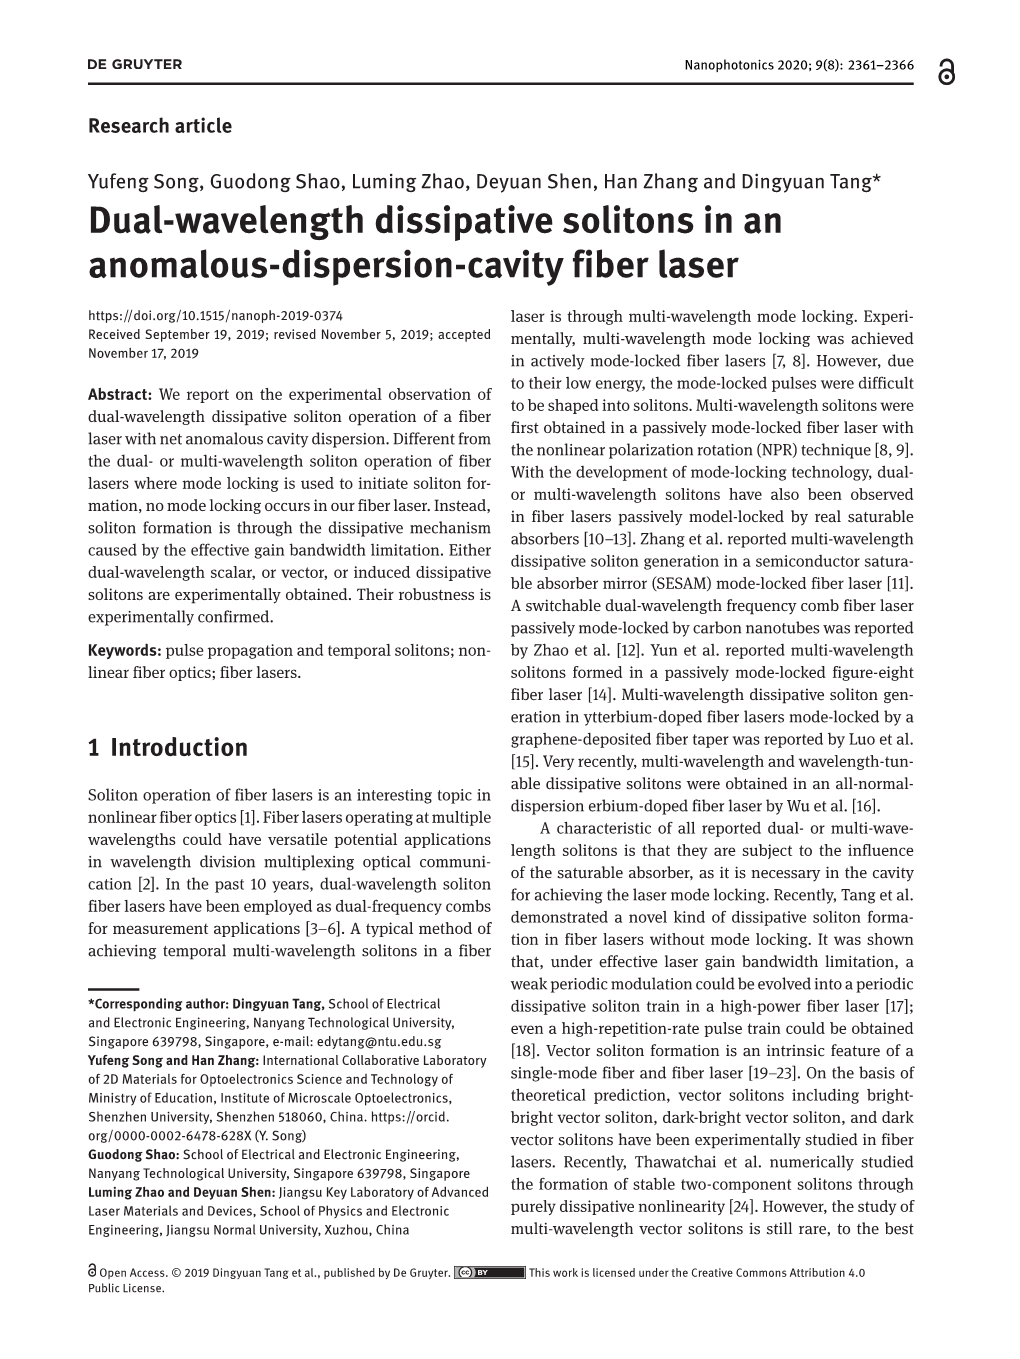 Dual-Wavelength Dissipative Solitons in an Anomalous-Dispersion-Cavity